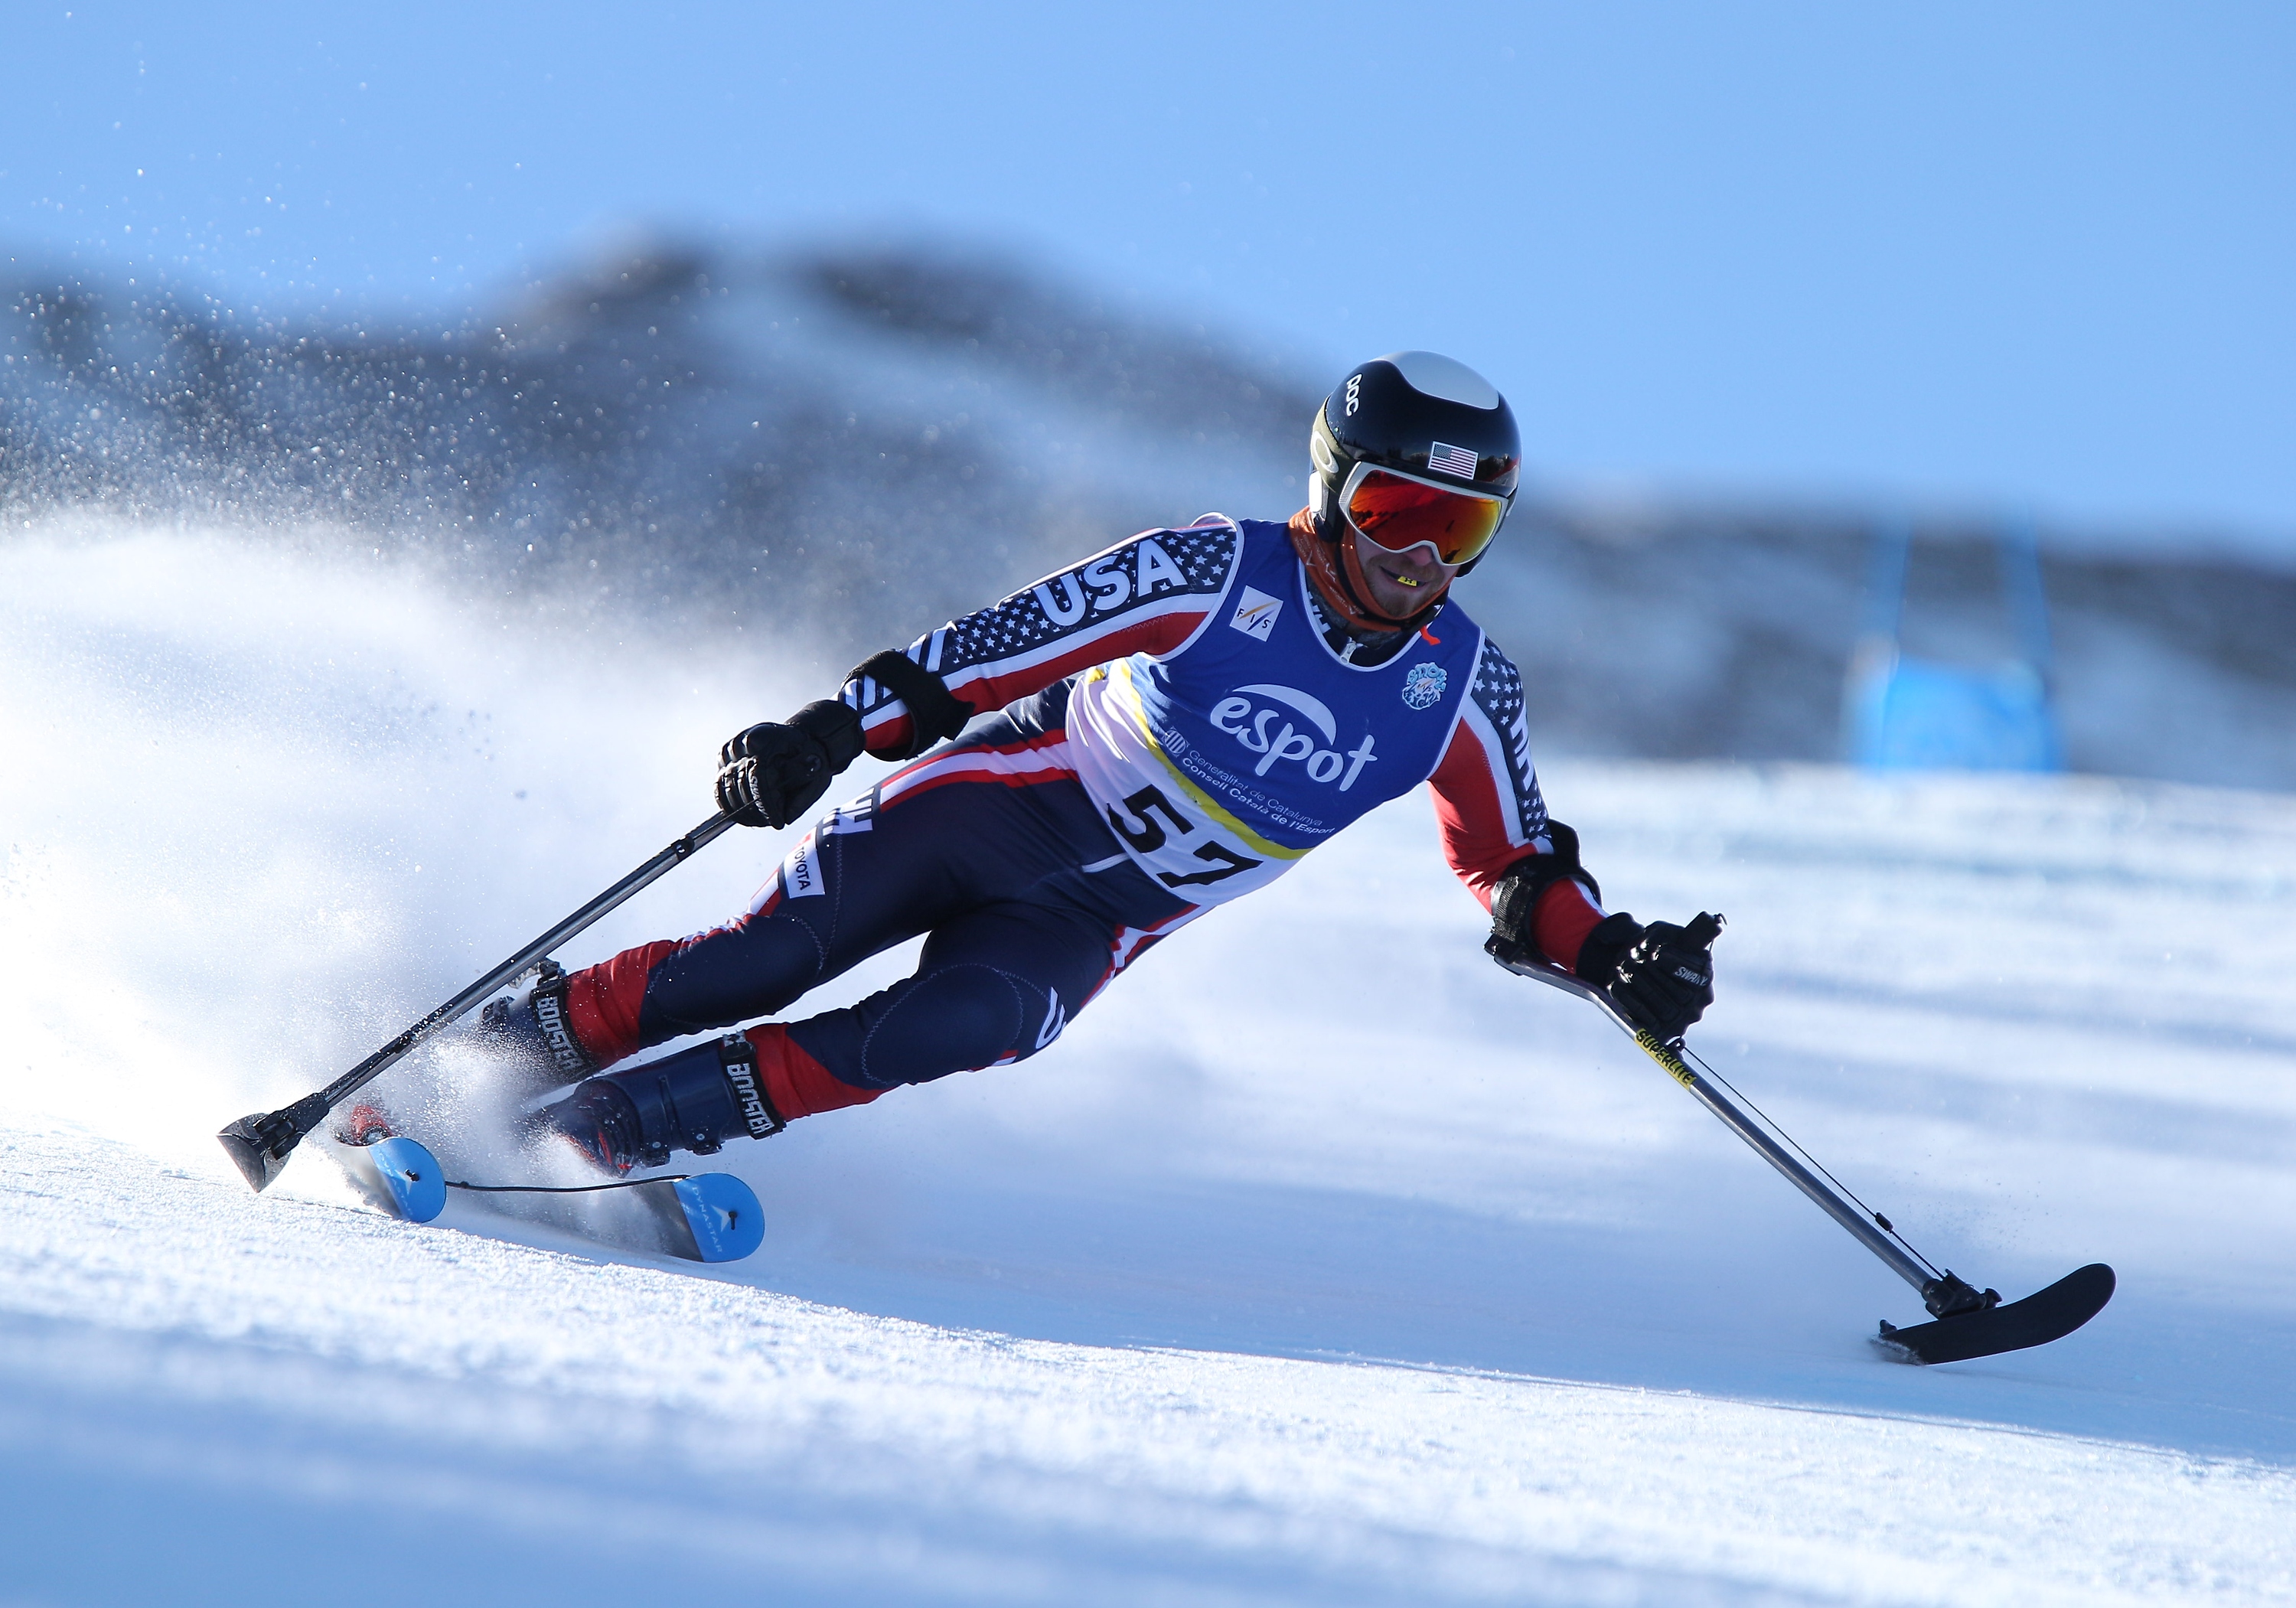 Andrew Haraghey skis in a giant slalom race